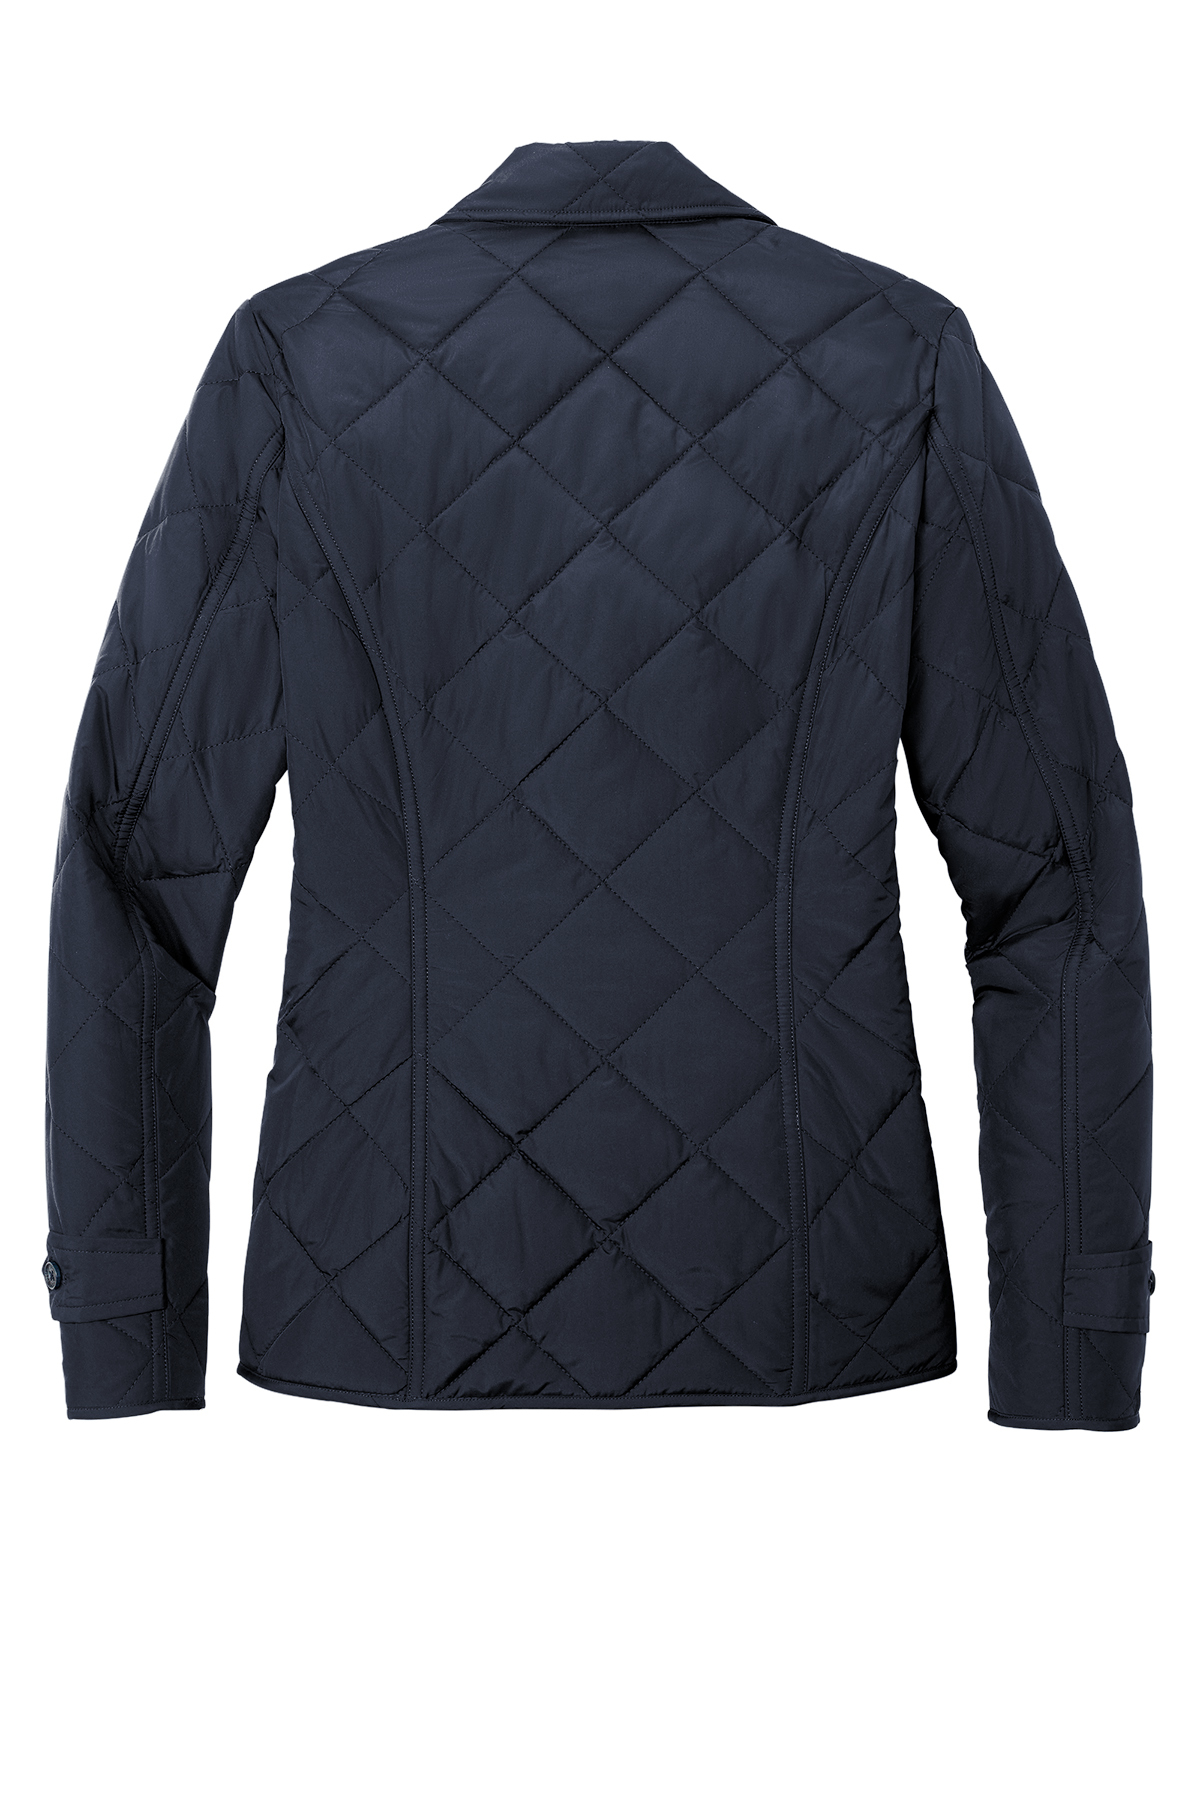 Brooks Brothers Women's Quilted Jacket, Product